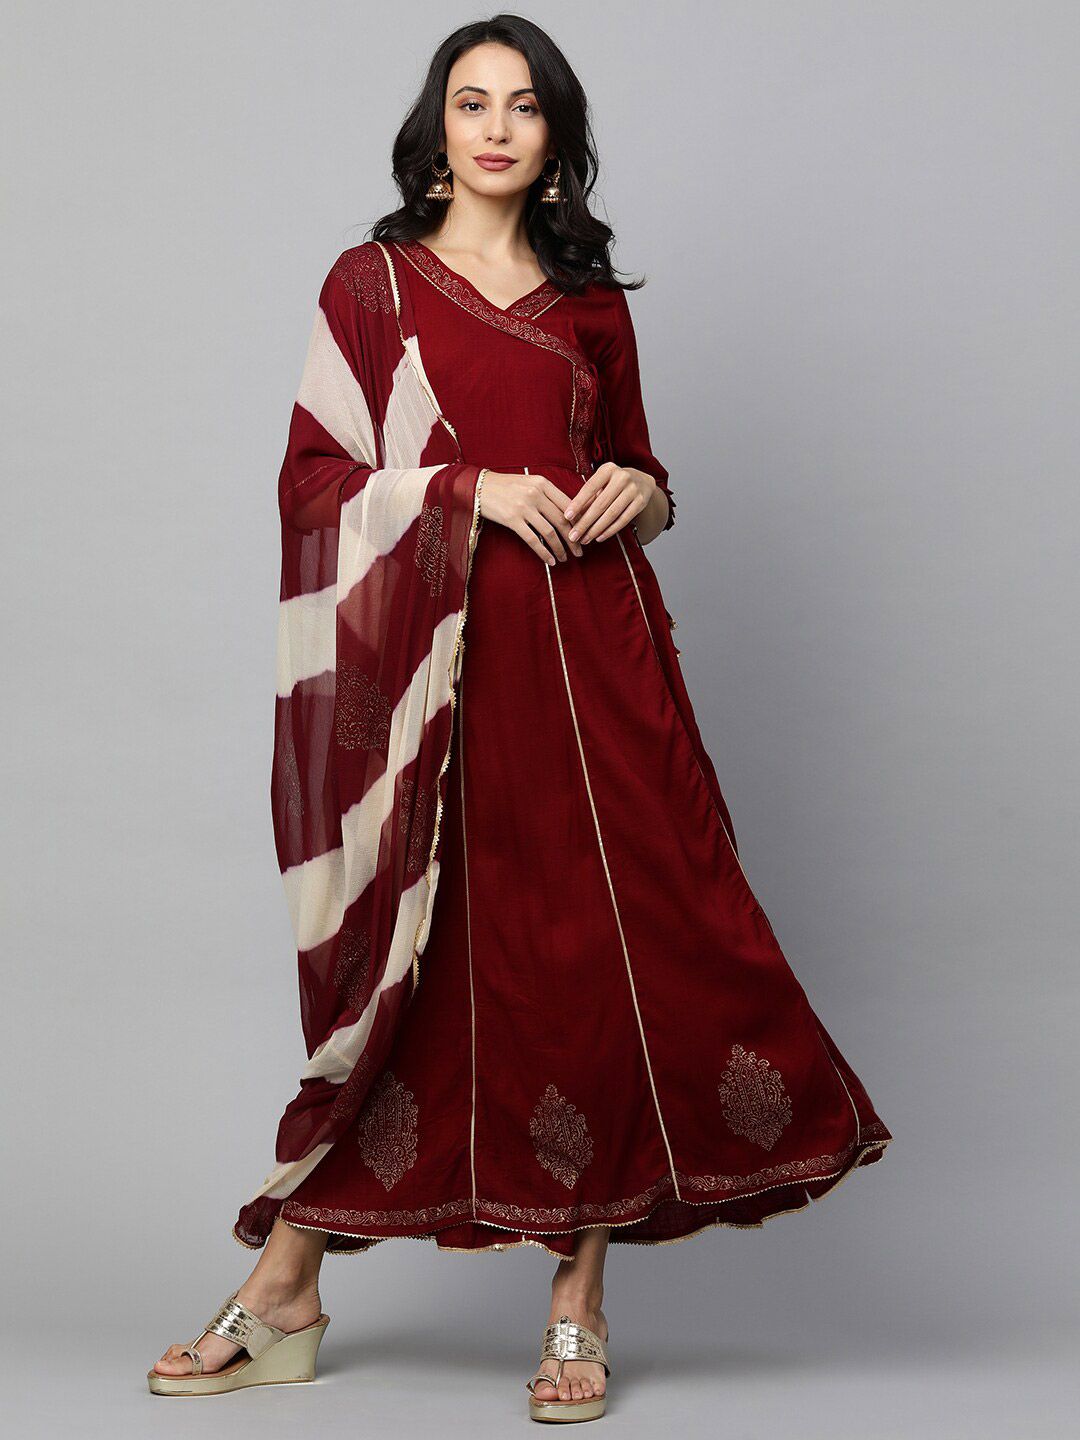 FASHOR Maroon & Gold-Toned Ethnic Motifs Ethnic Maxi Dress With Dupatta Price in India